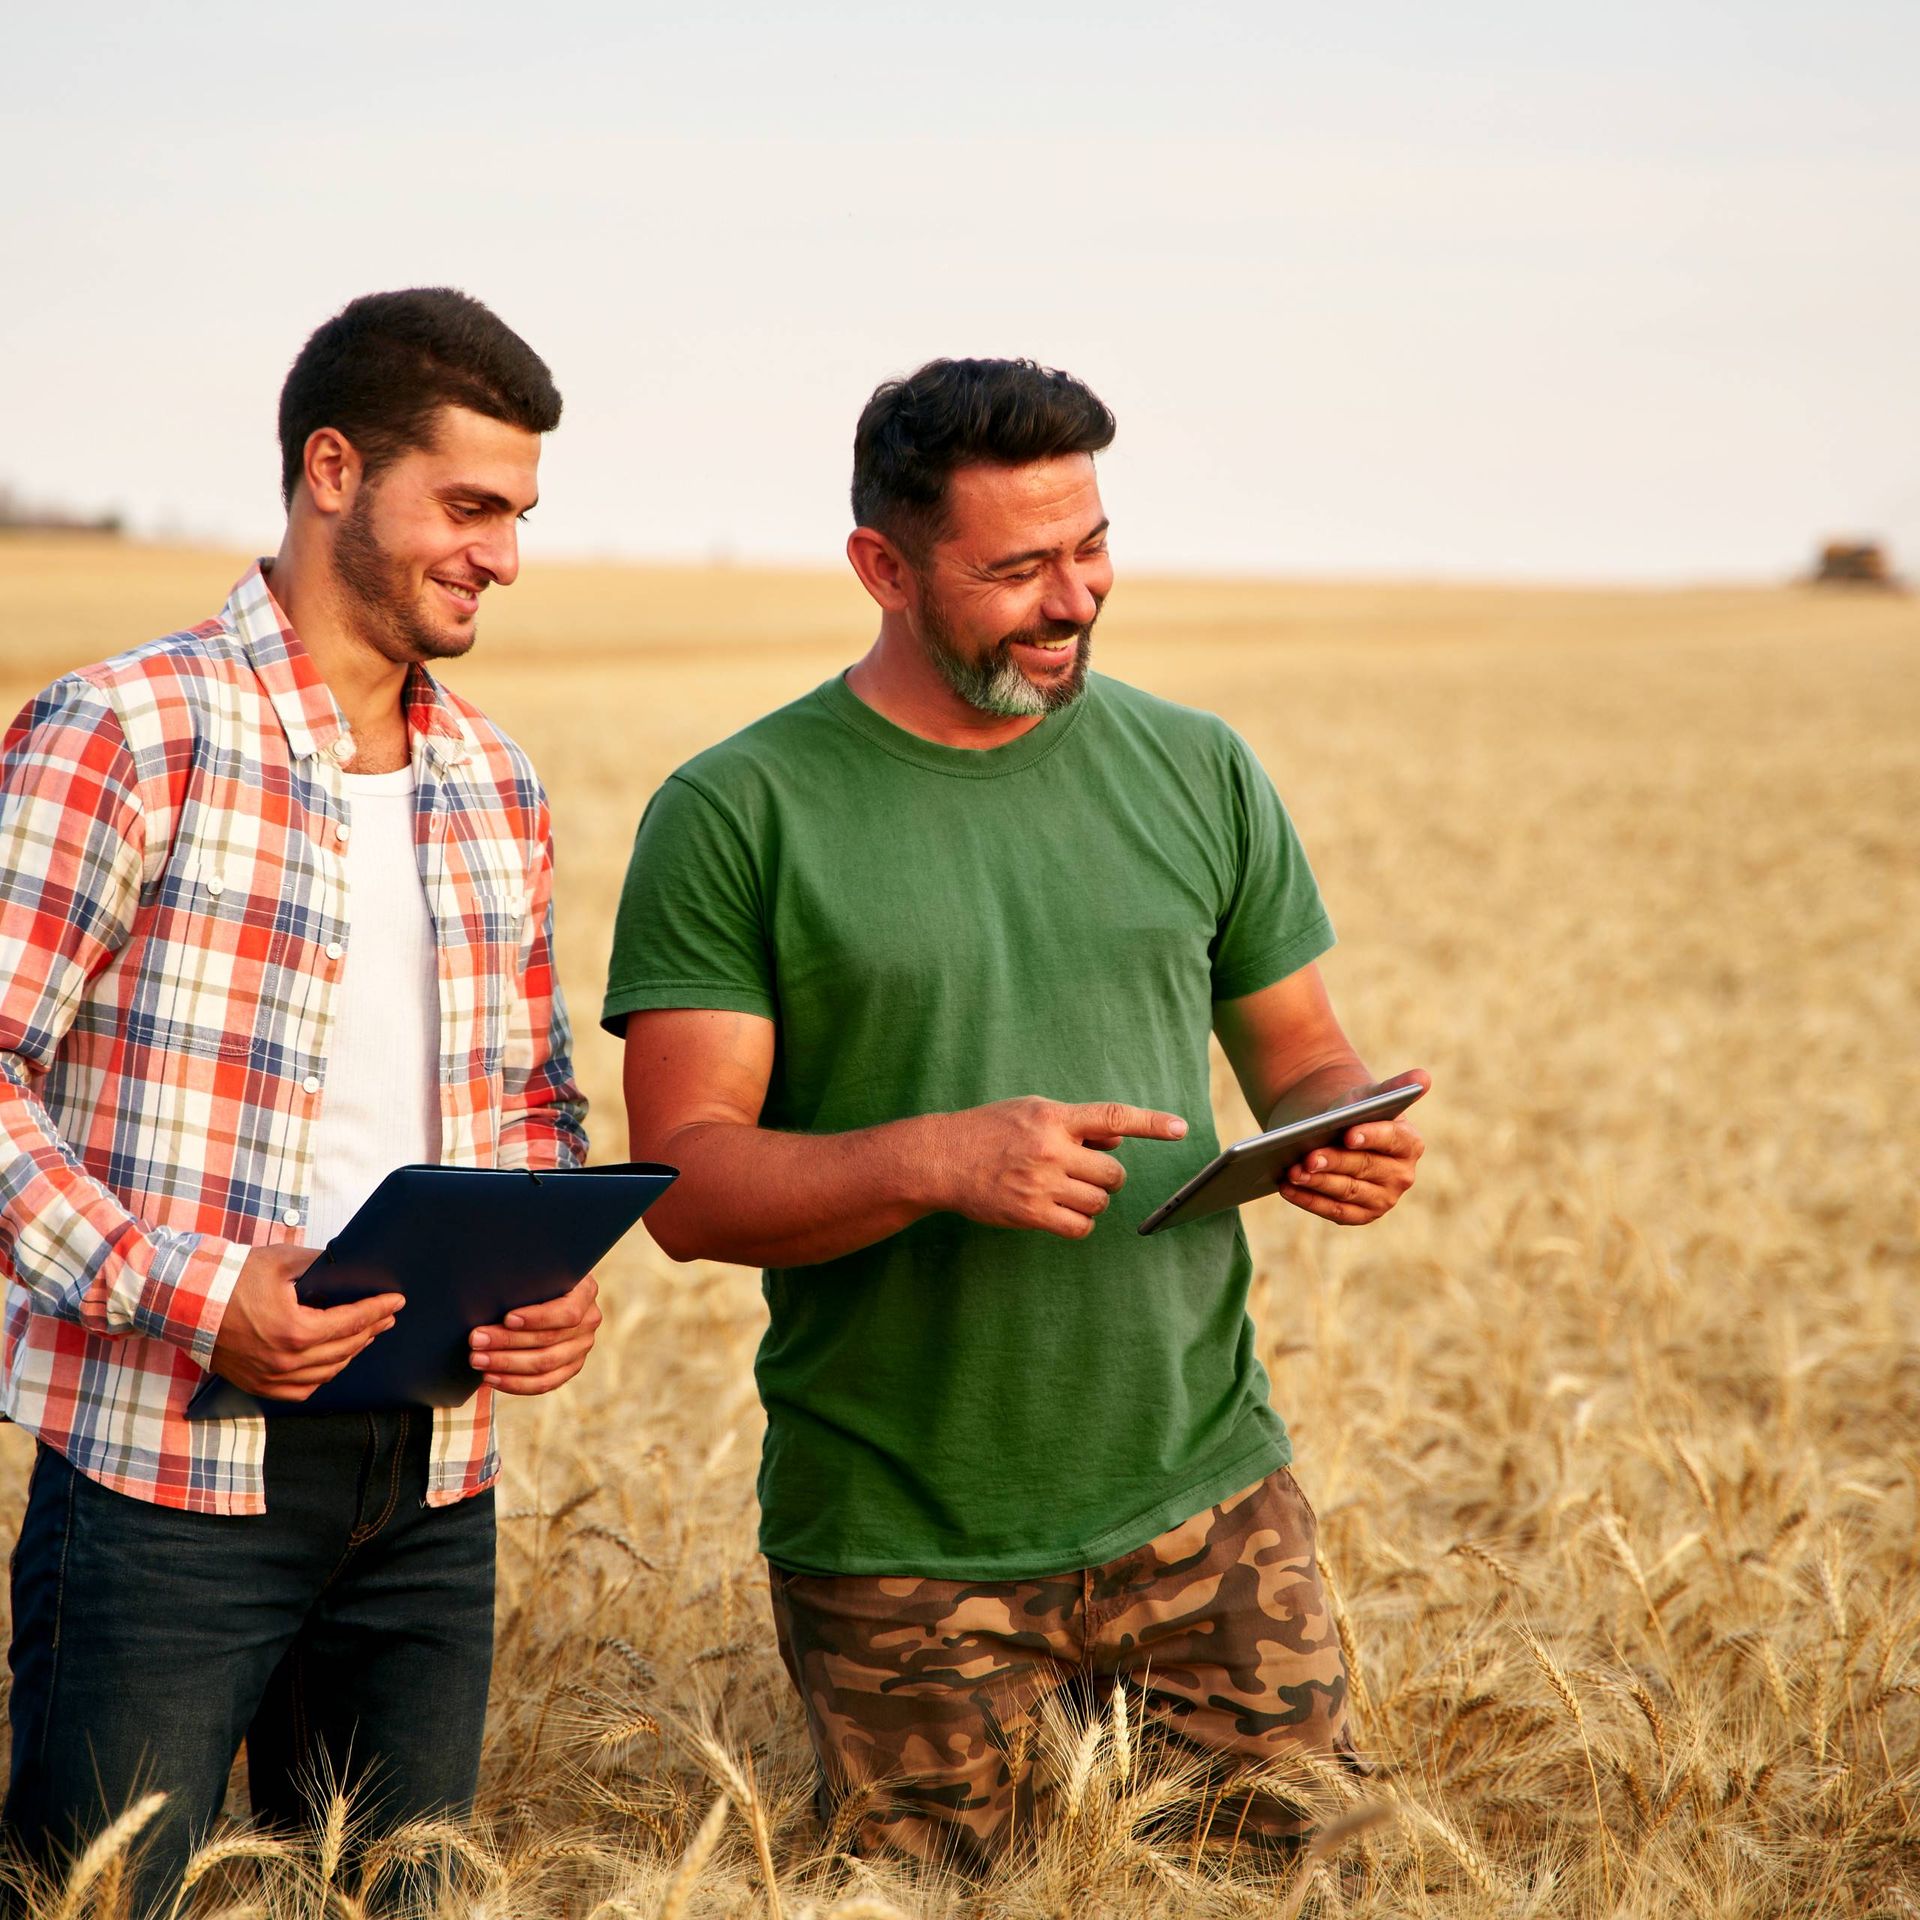 Image of a certification body auditors in a wheat field checking implementation